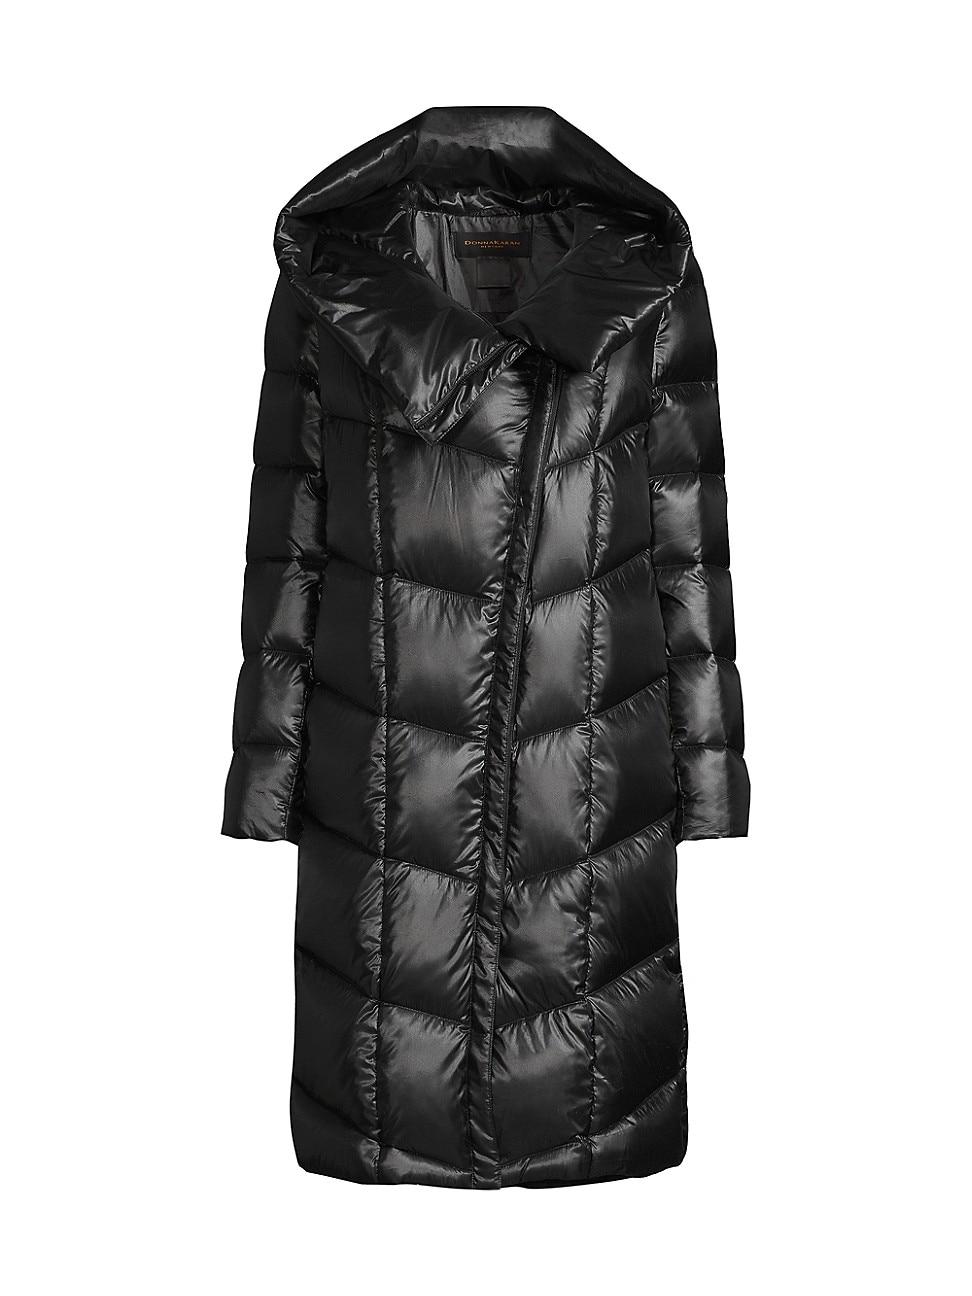 Donna Karan Synthetic Long Quilted Puffer Jacket in Black | Lyst